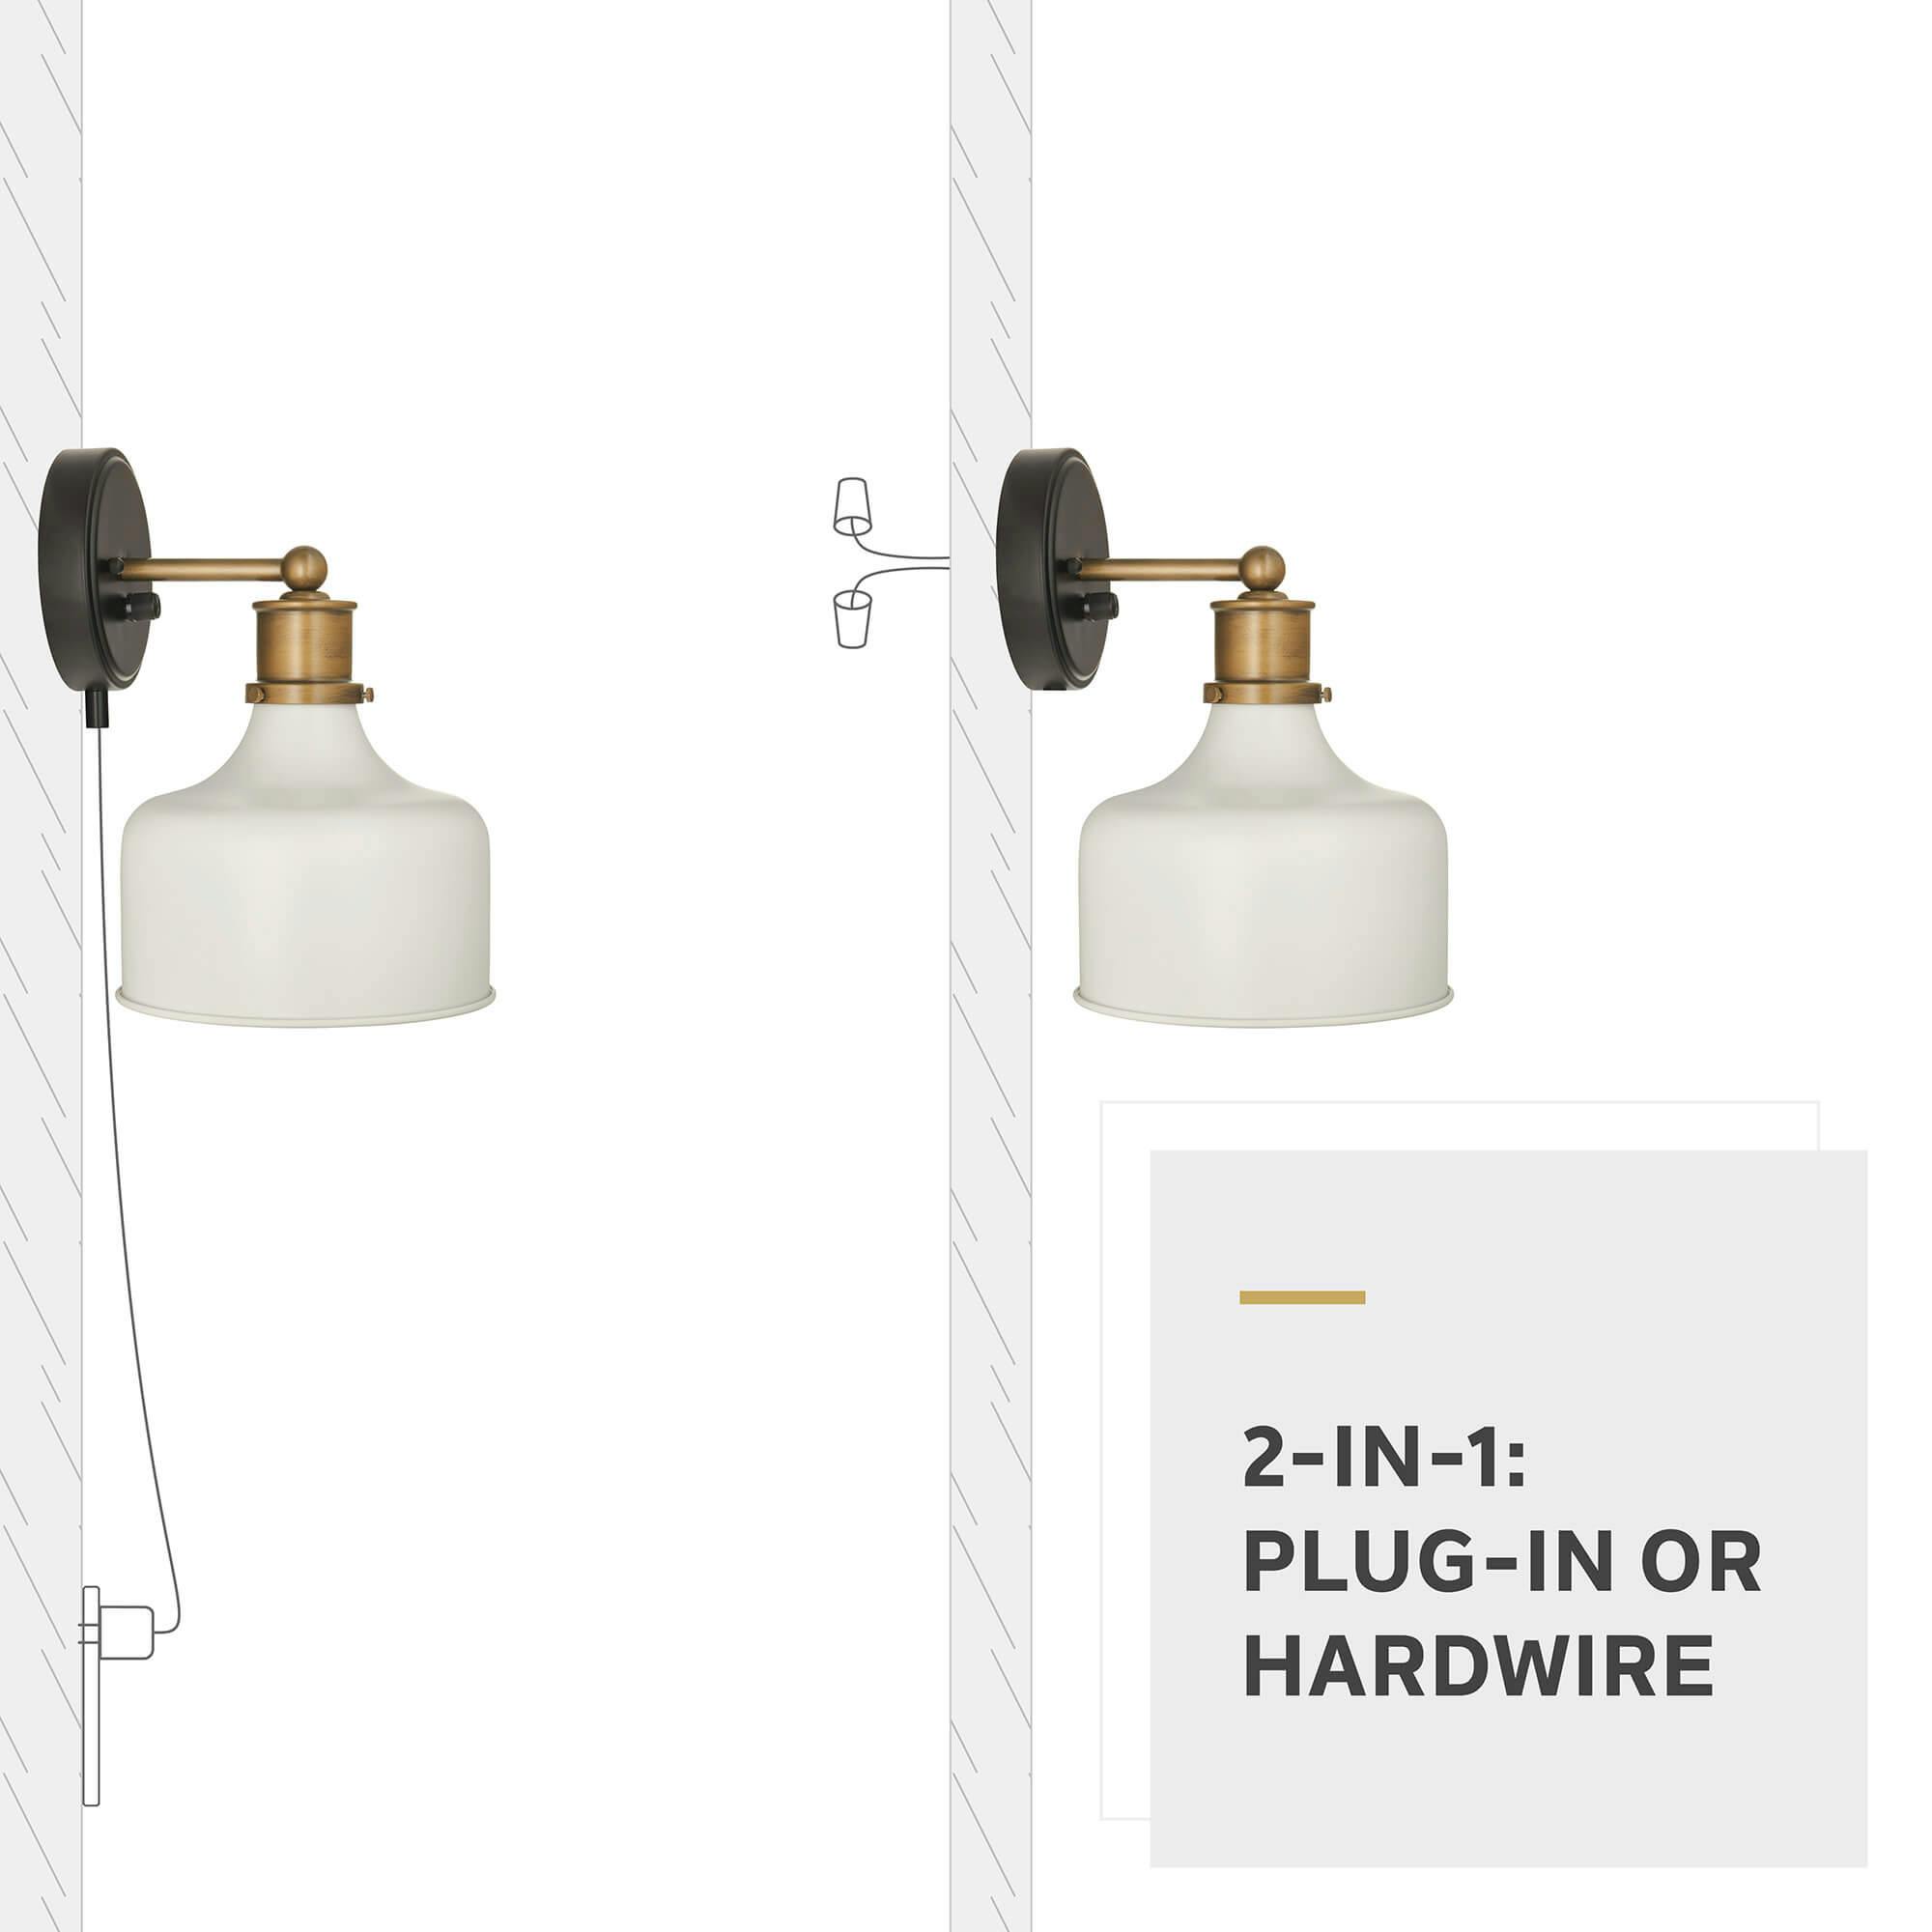 Installation options for the Ernest 11 Inch 1 Light Plug-In Wall Sconce in Natural Brass and Matte Black